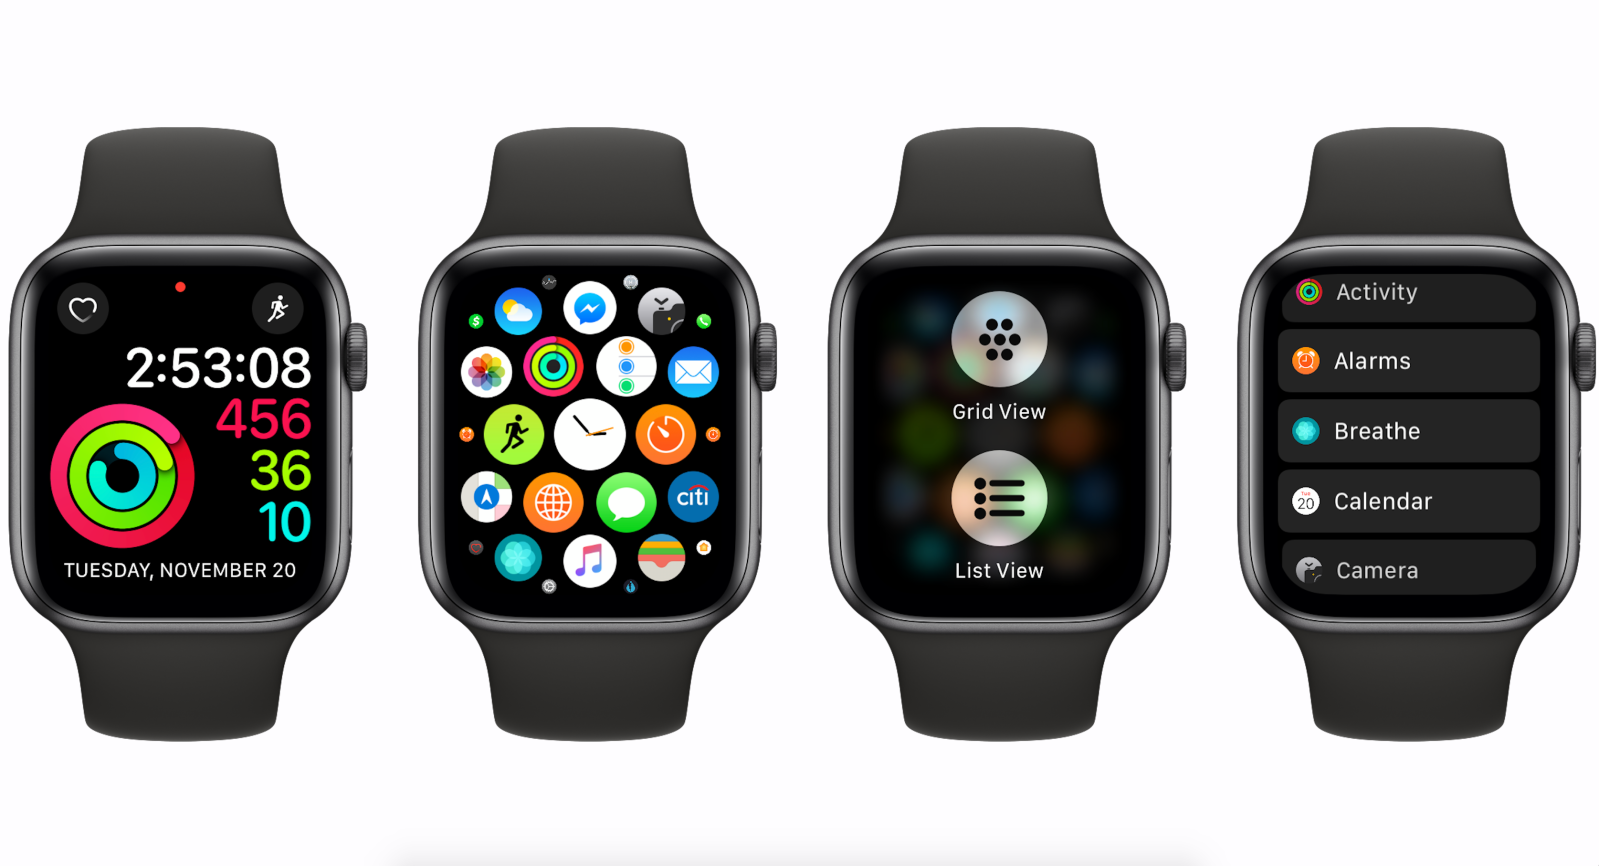 How to switch to list view or grid view on Apple Watch